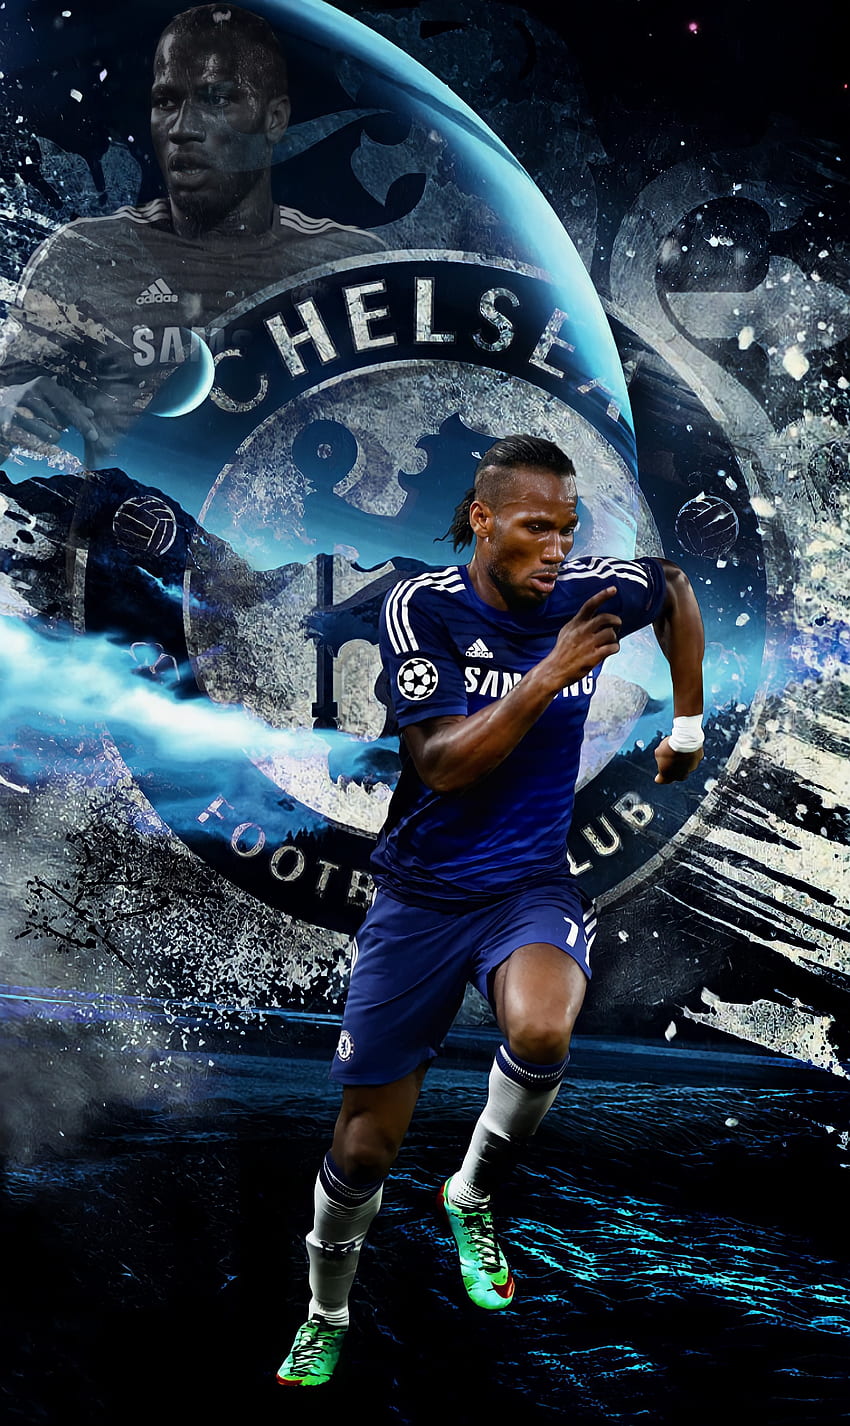 Cool Didier Drogba Poster Wall Art Poster Bedroom Prints Home Decor Hanging  Picture Canvas Painting Posters 20x30inch(50x75cm) : Amazon.co.uk: Home &  Kitchen